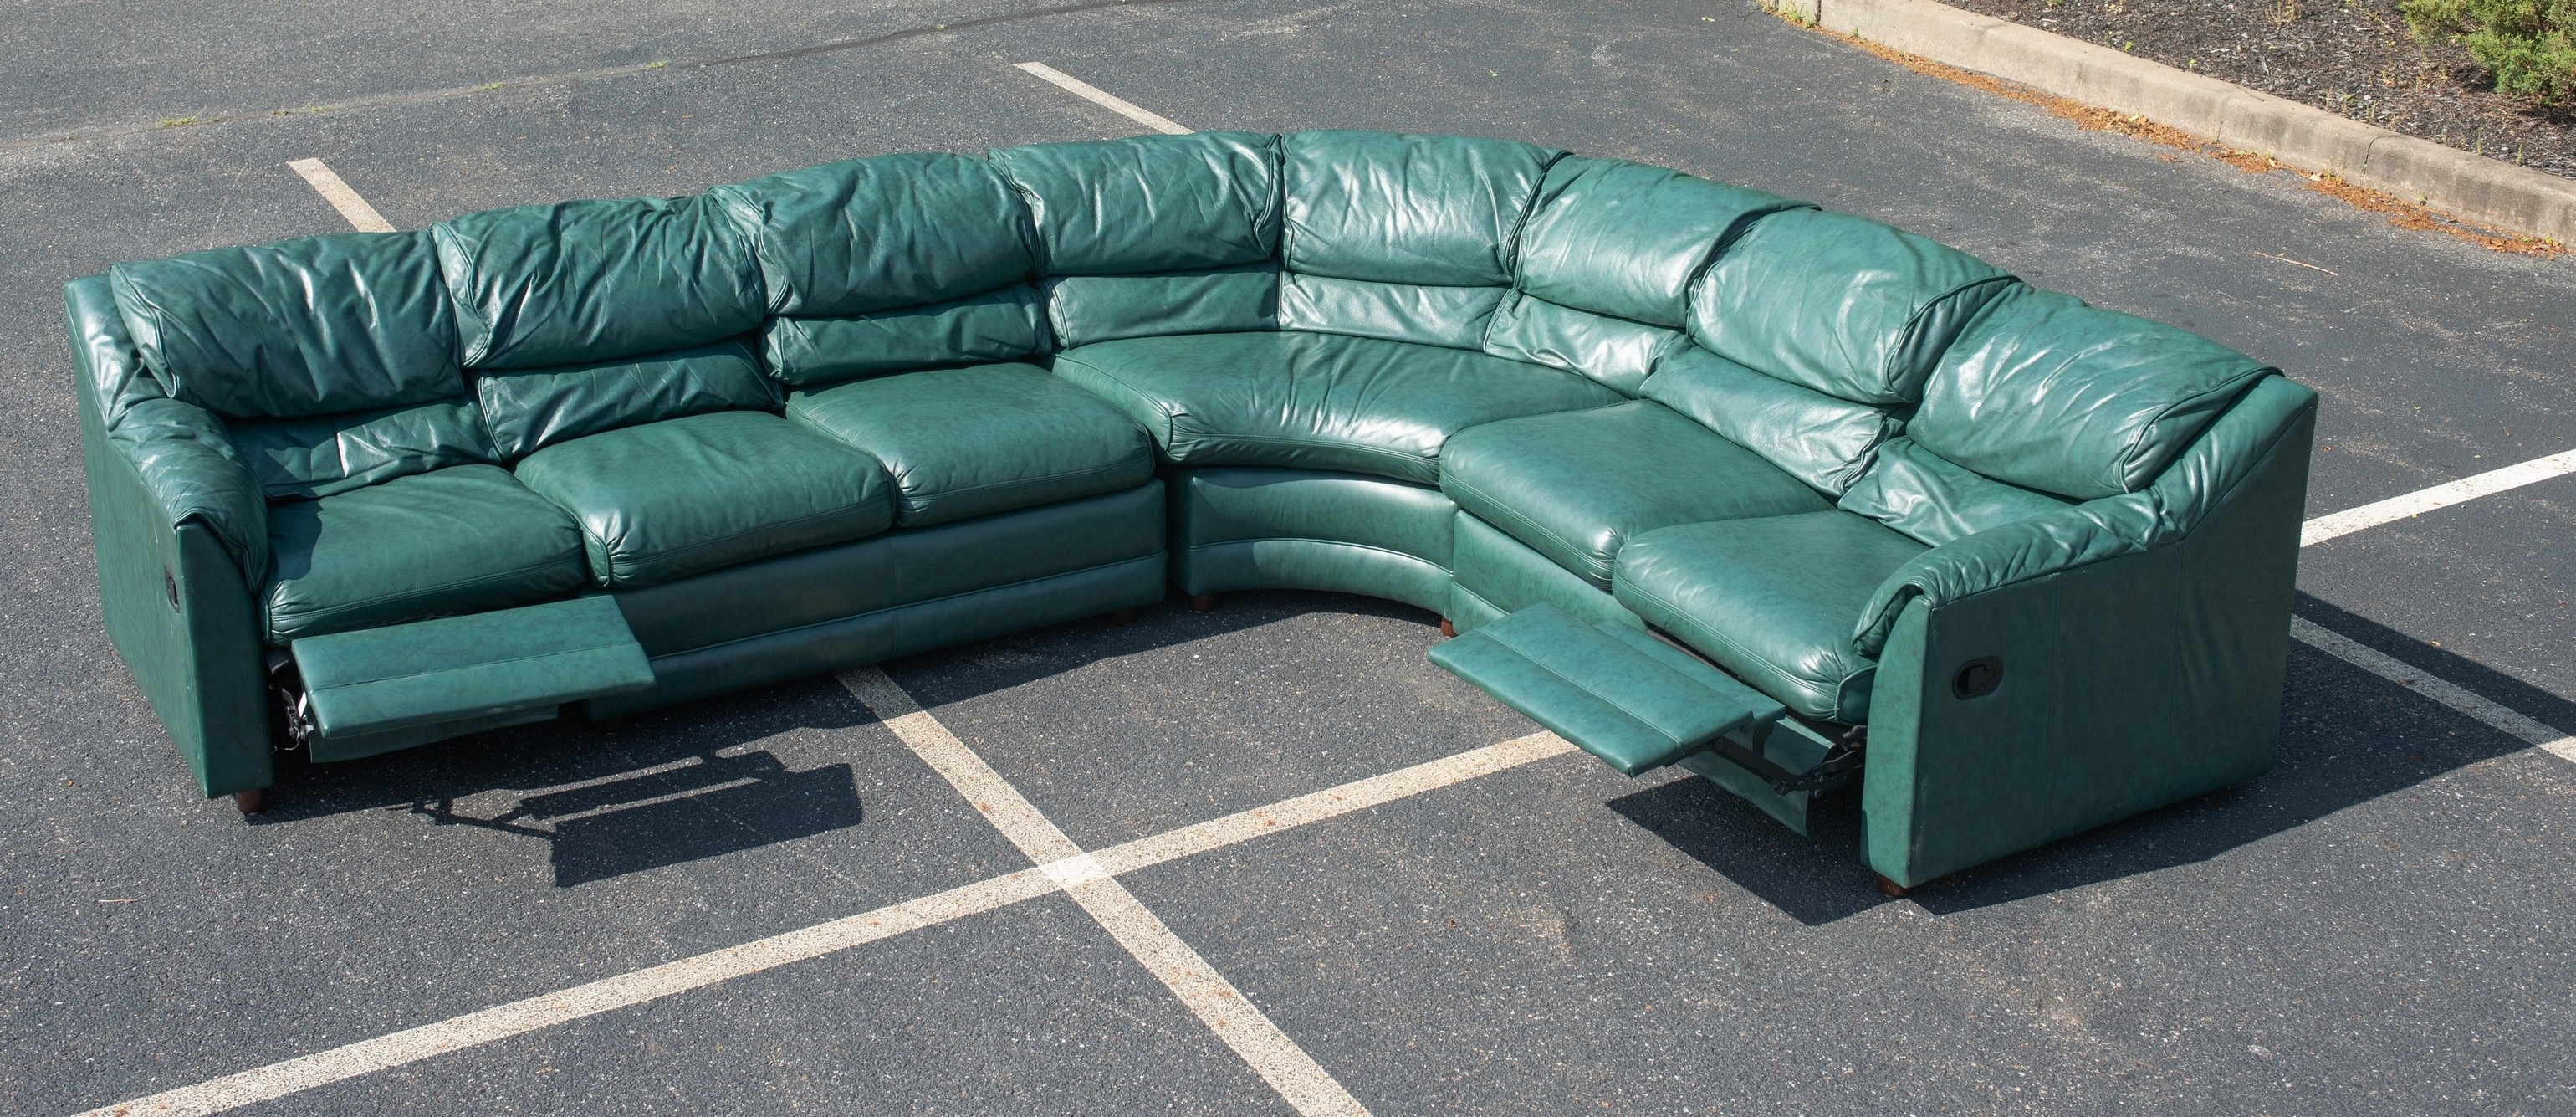 Ethan Allen Green Leather Upholstered